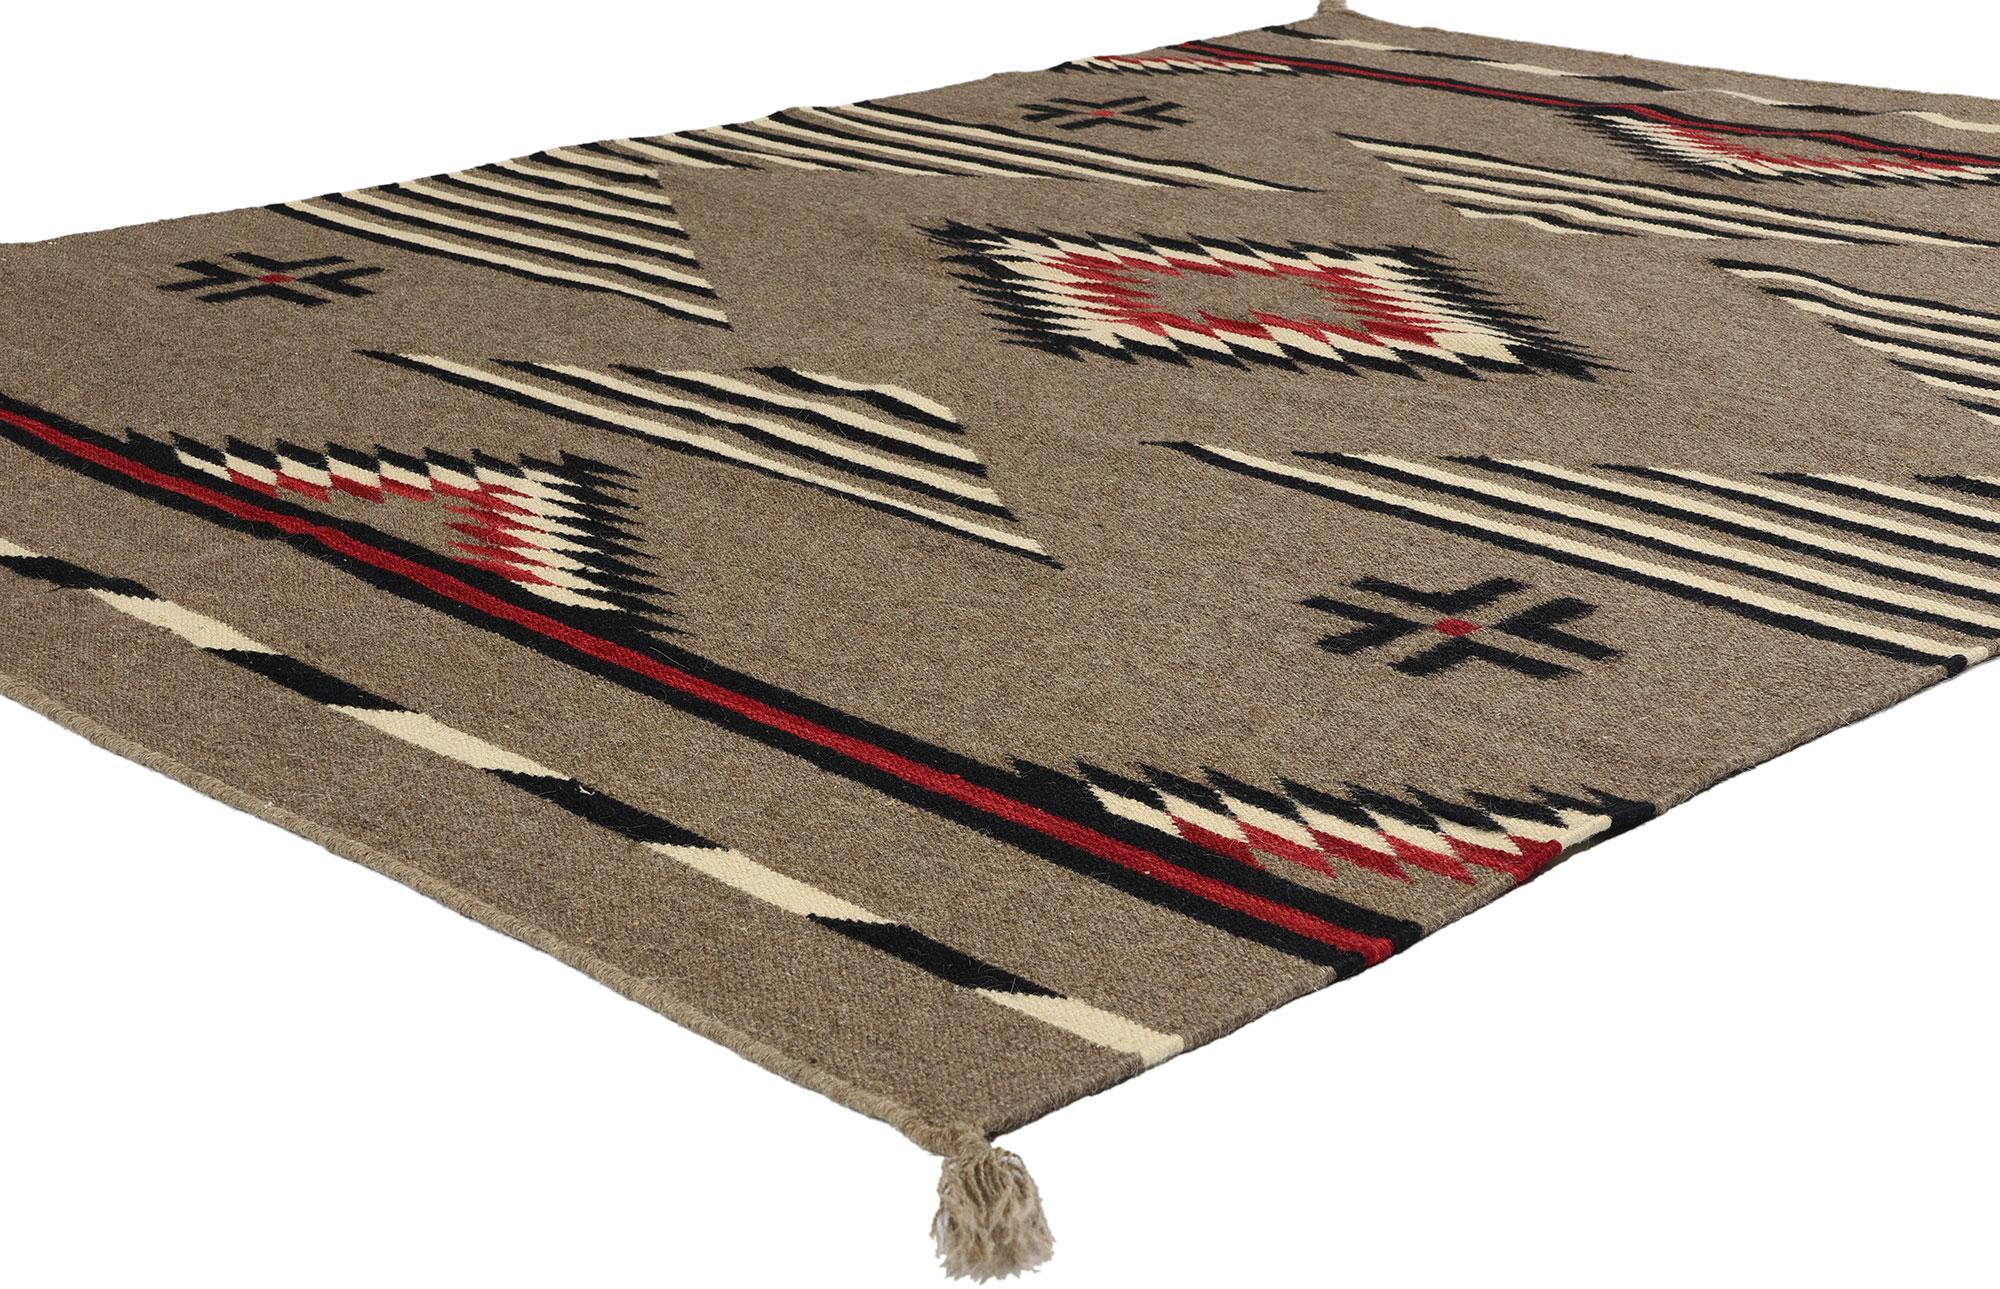 81045 Southwest Modern Ganado Navajo-Style Rug, 05'02 x 07'00. Let yourself be whisked away on an enchanting journey of sunbaked warmth and welcomed informality, as you step onto this meticulously handwoven wool Ganado Navajo-style rug. A testament